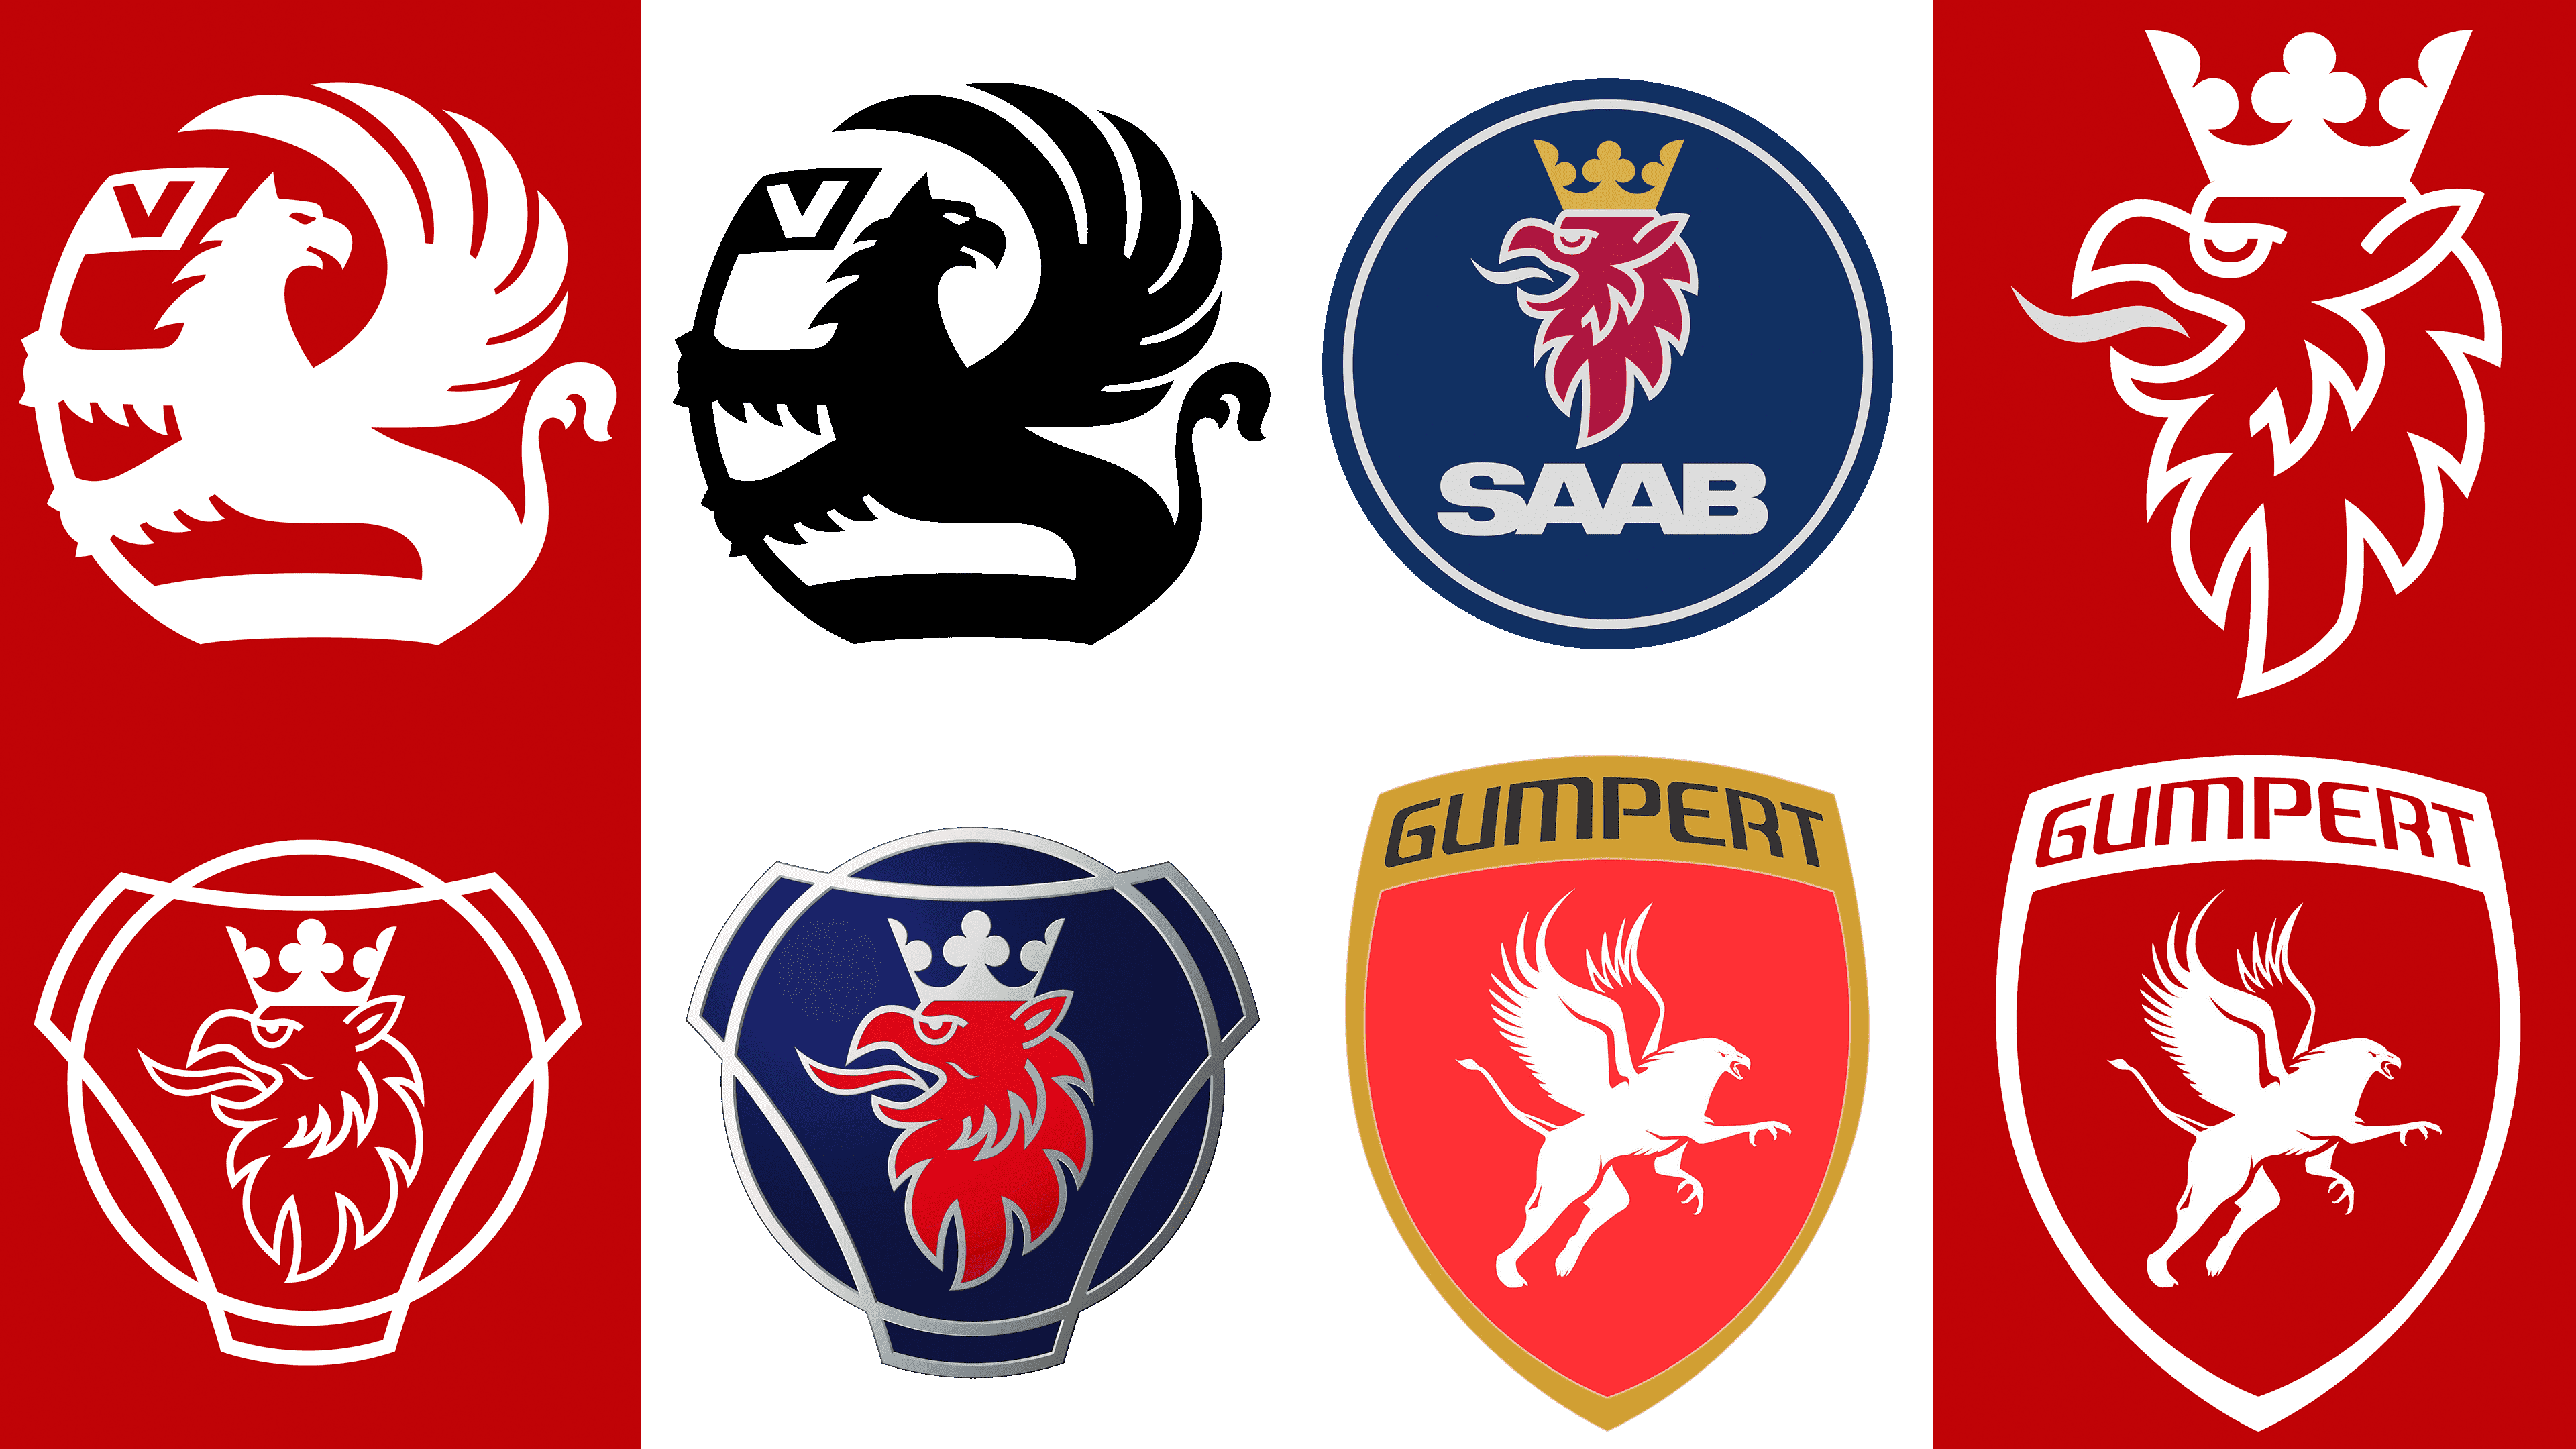 Car Logos with a Griffin